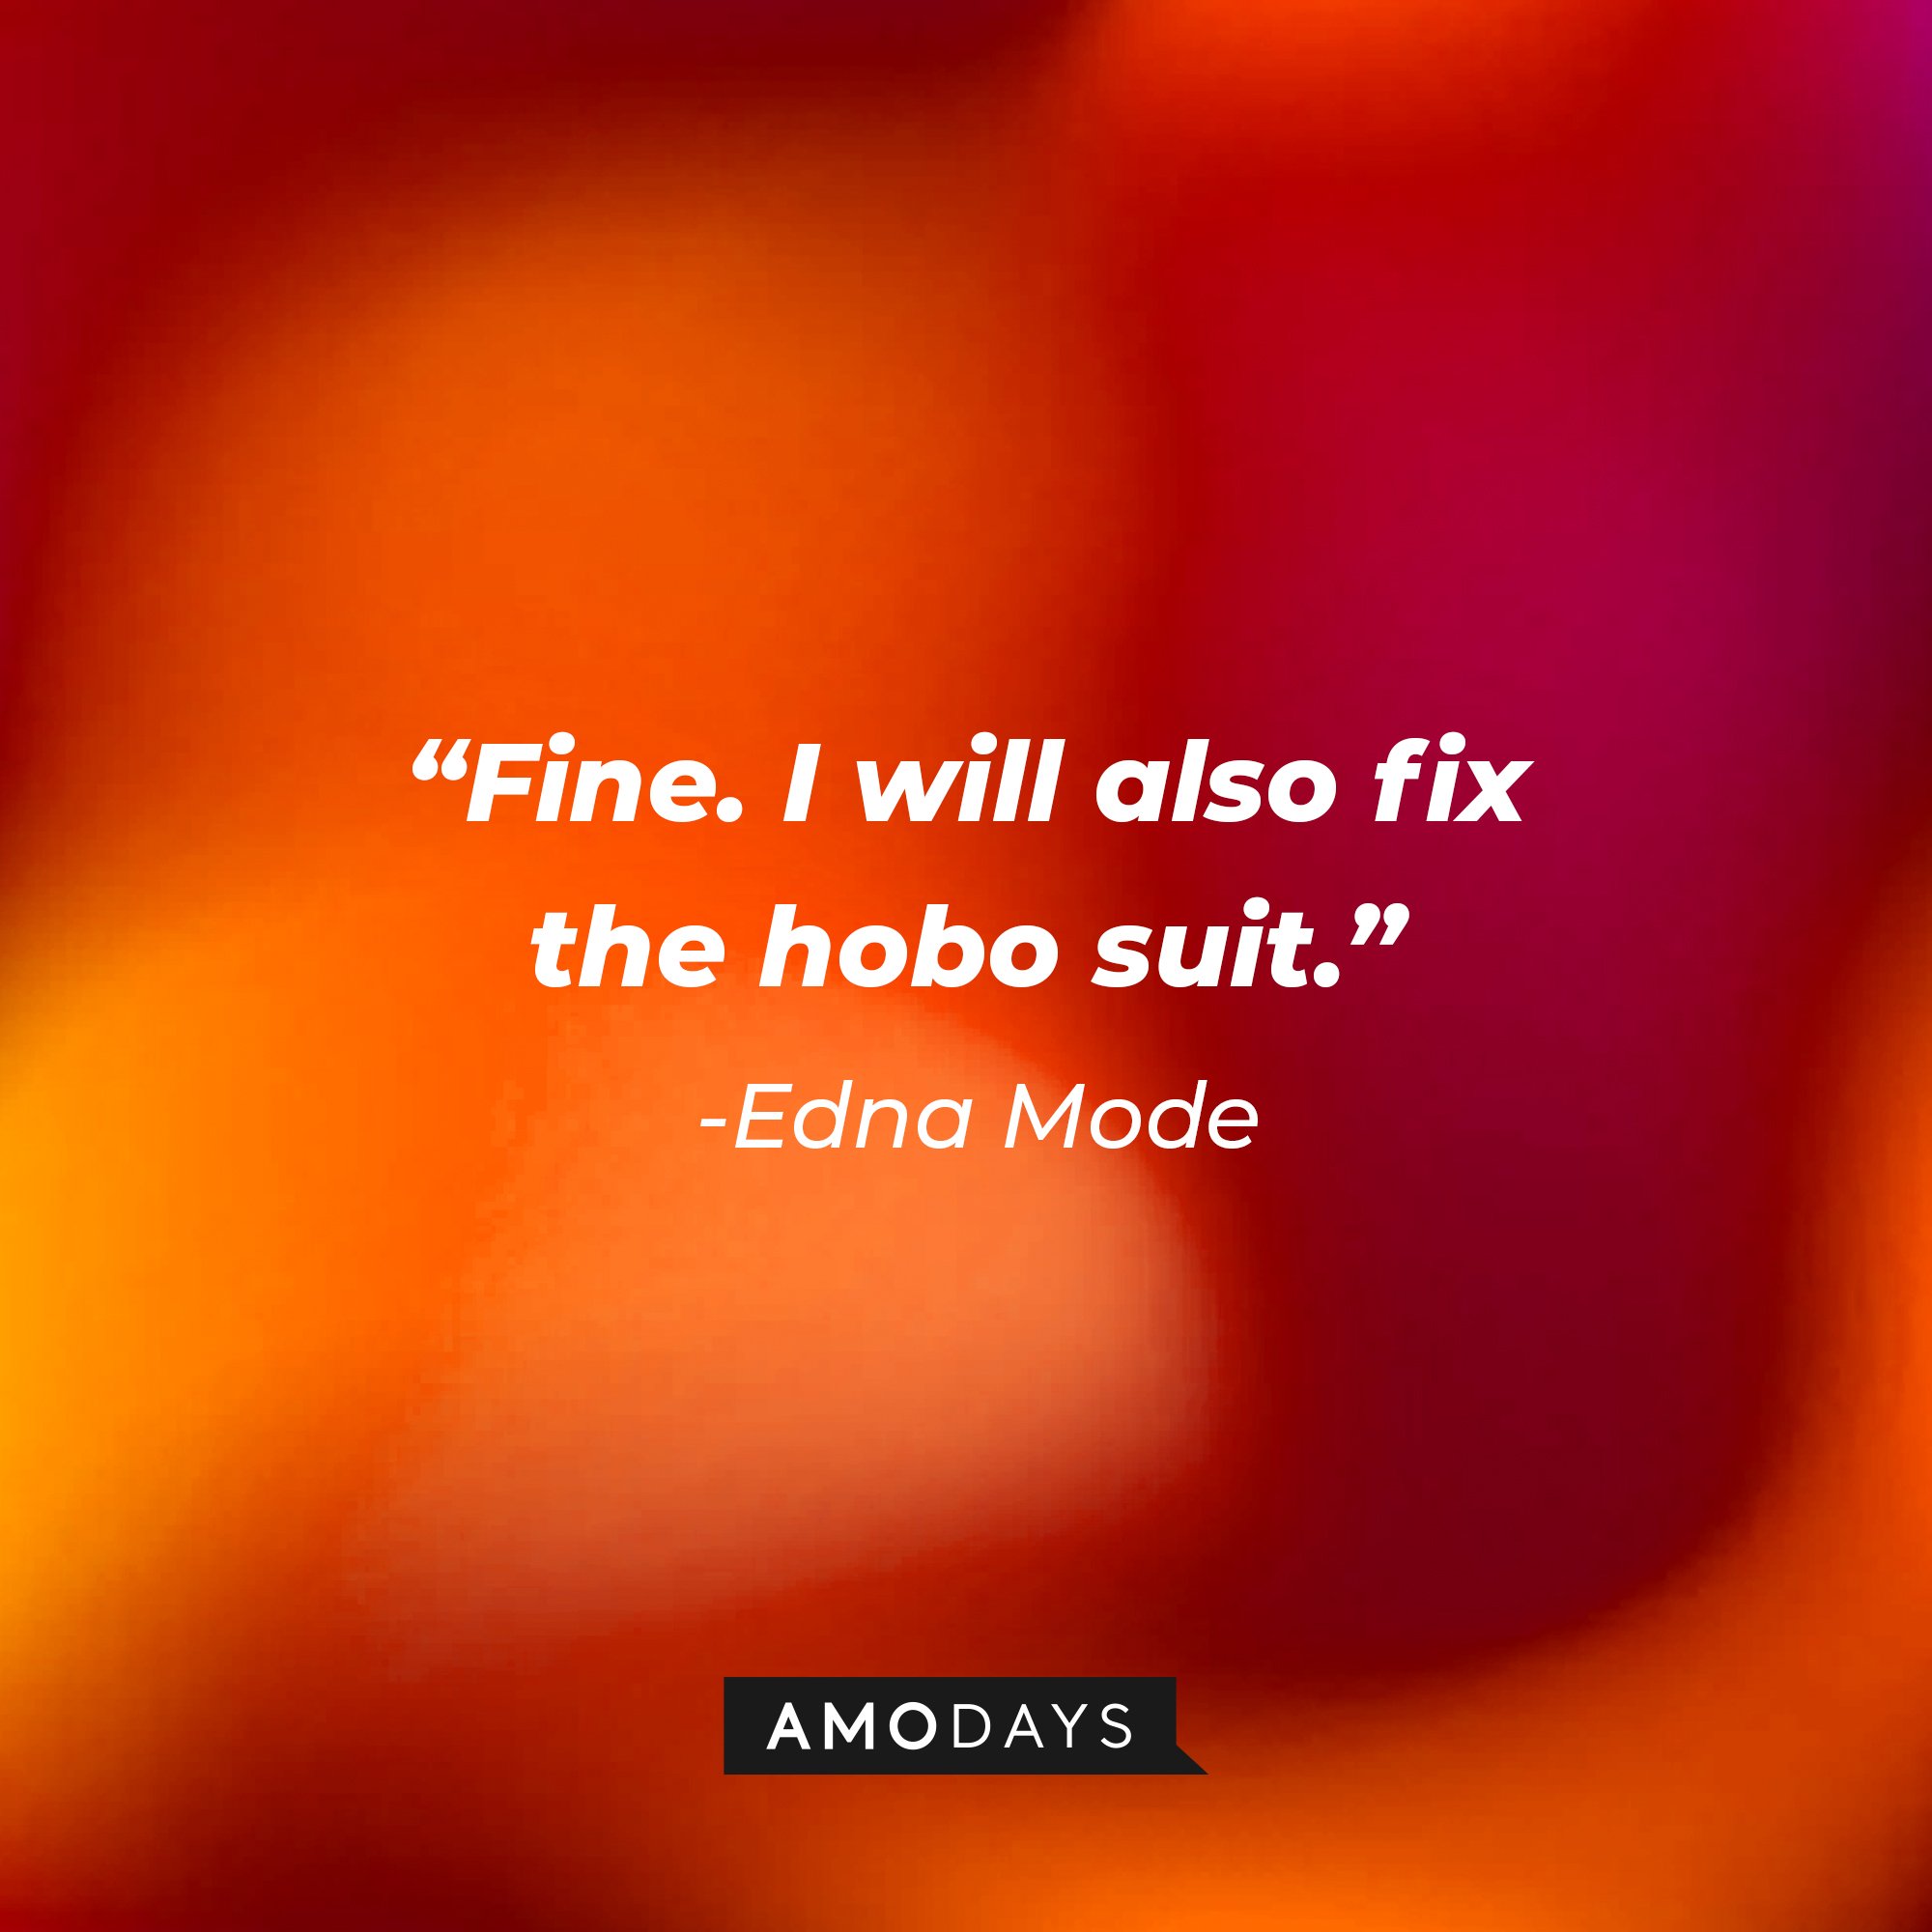 Edna Mode’s quote: "Fine. I will also fix the hobo suit." | Image: AmoDays